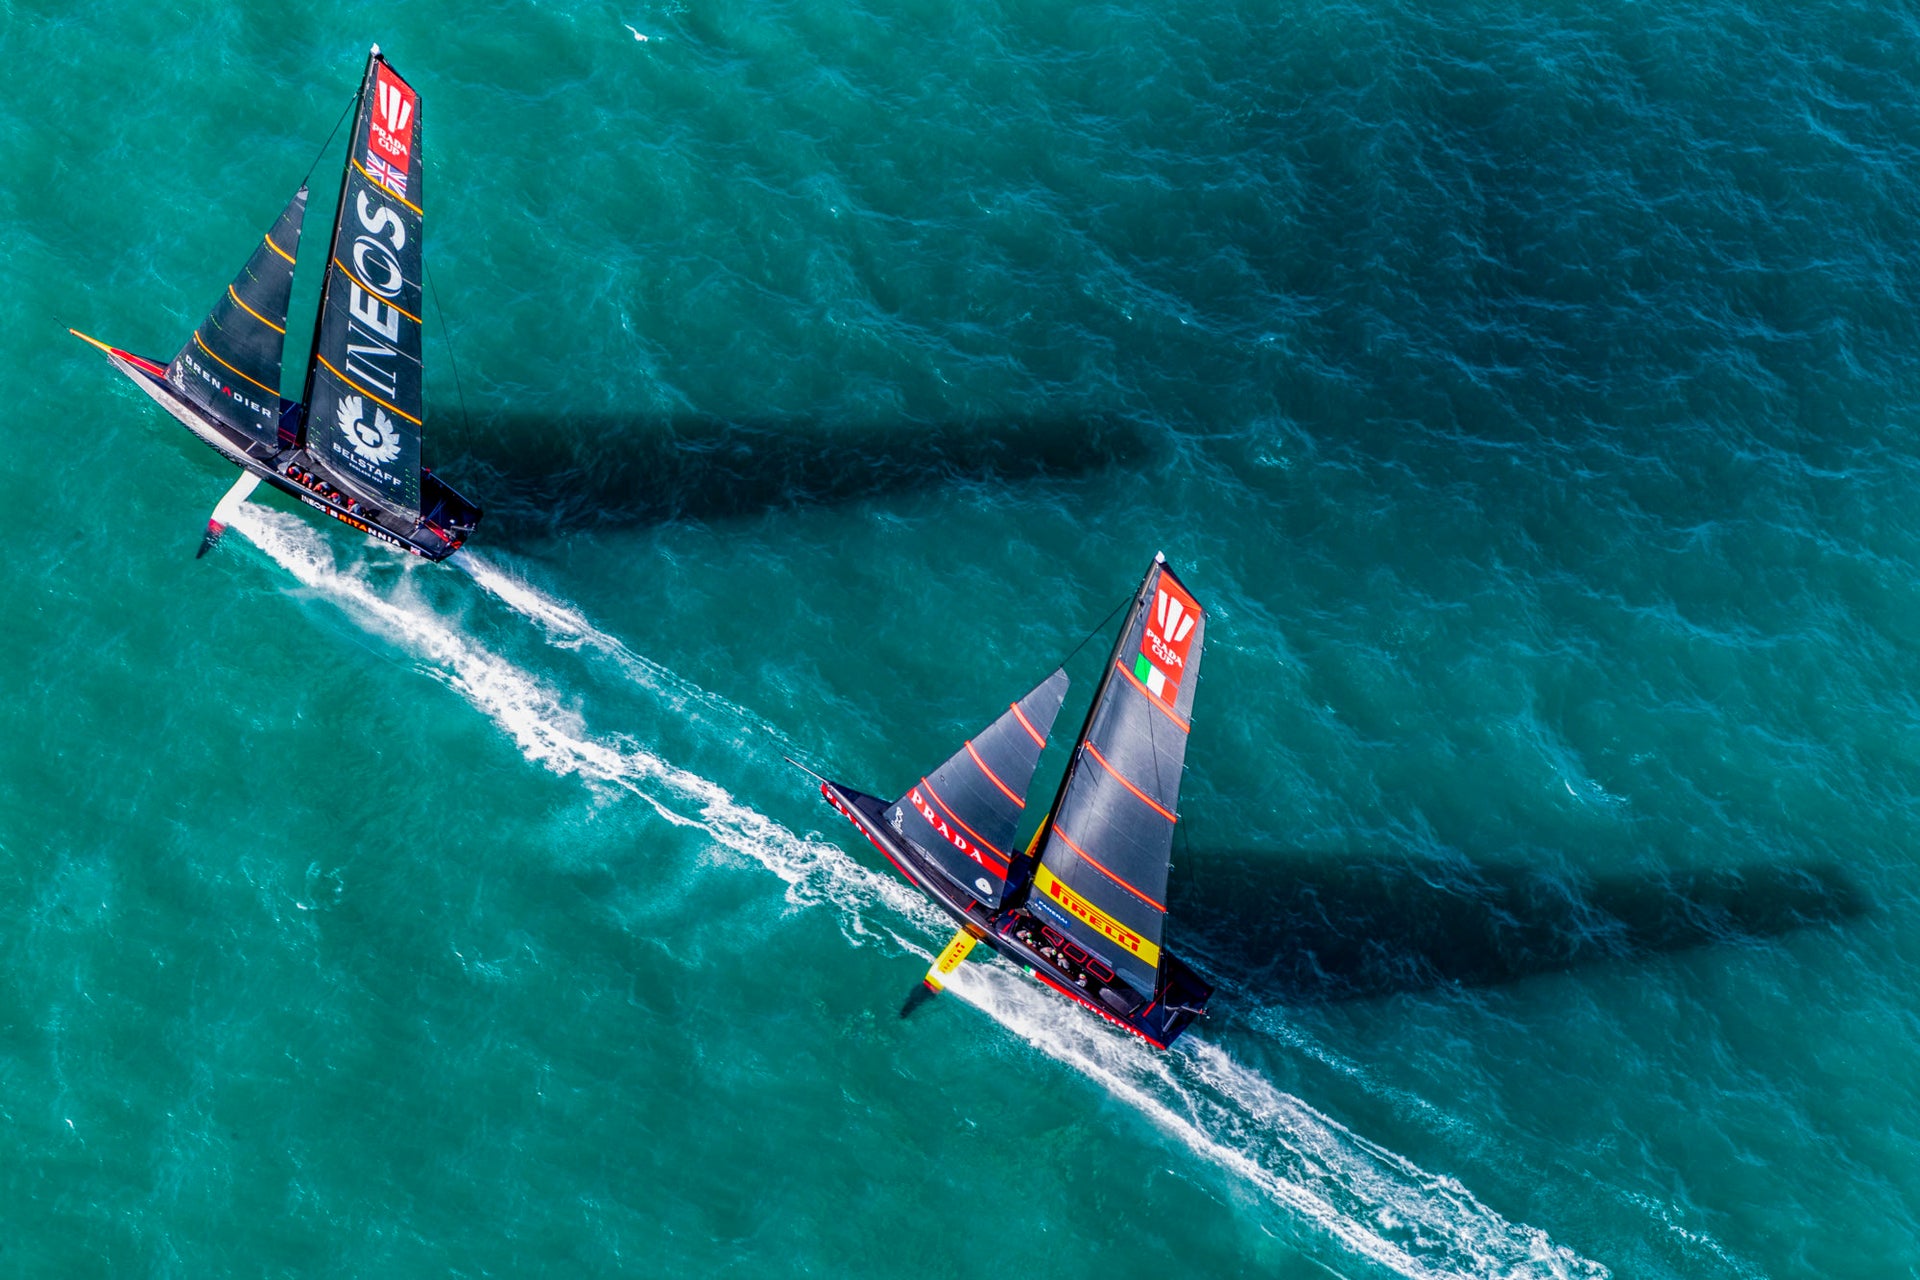 AMERICA’S CUP FAST FACTS